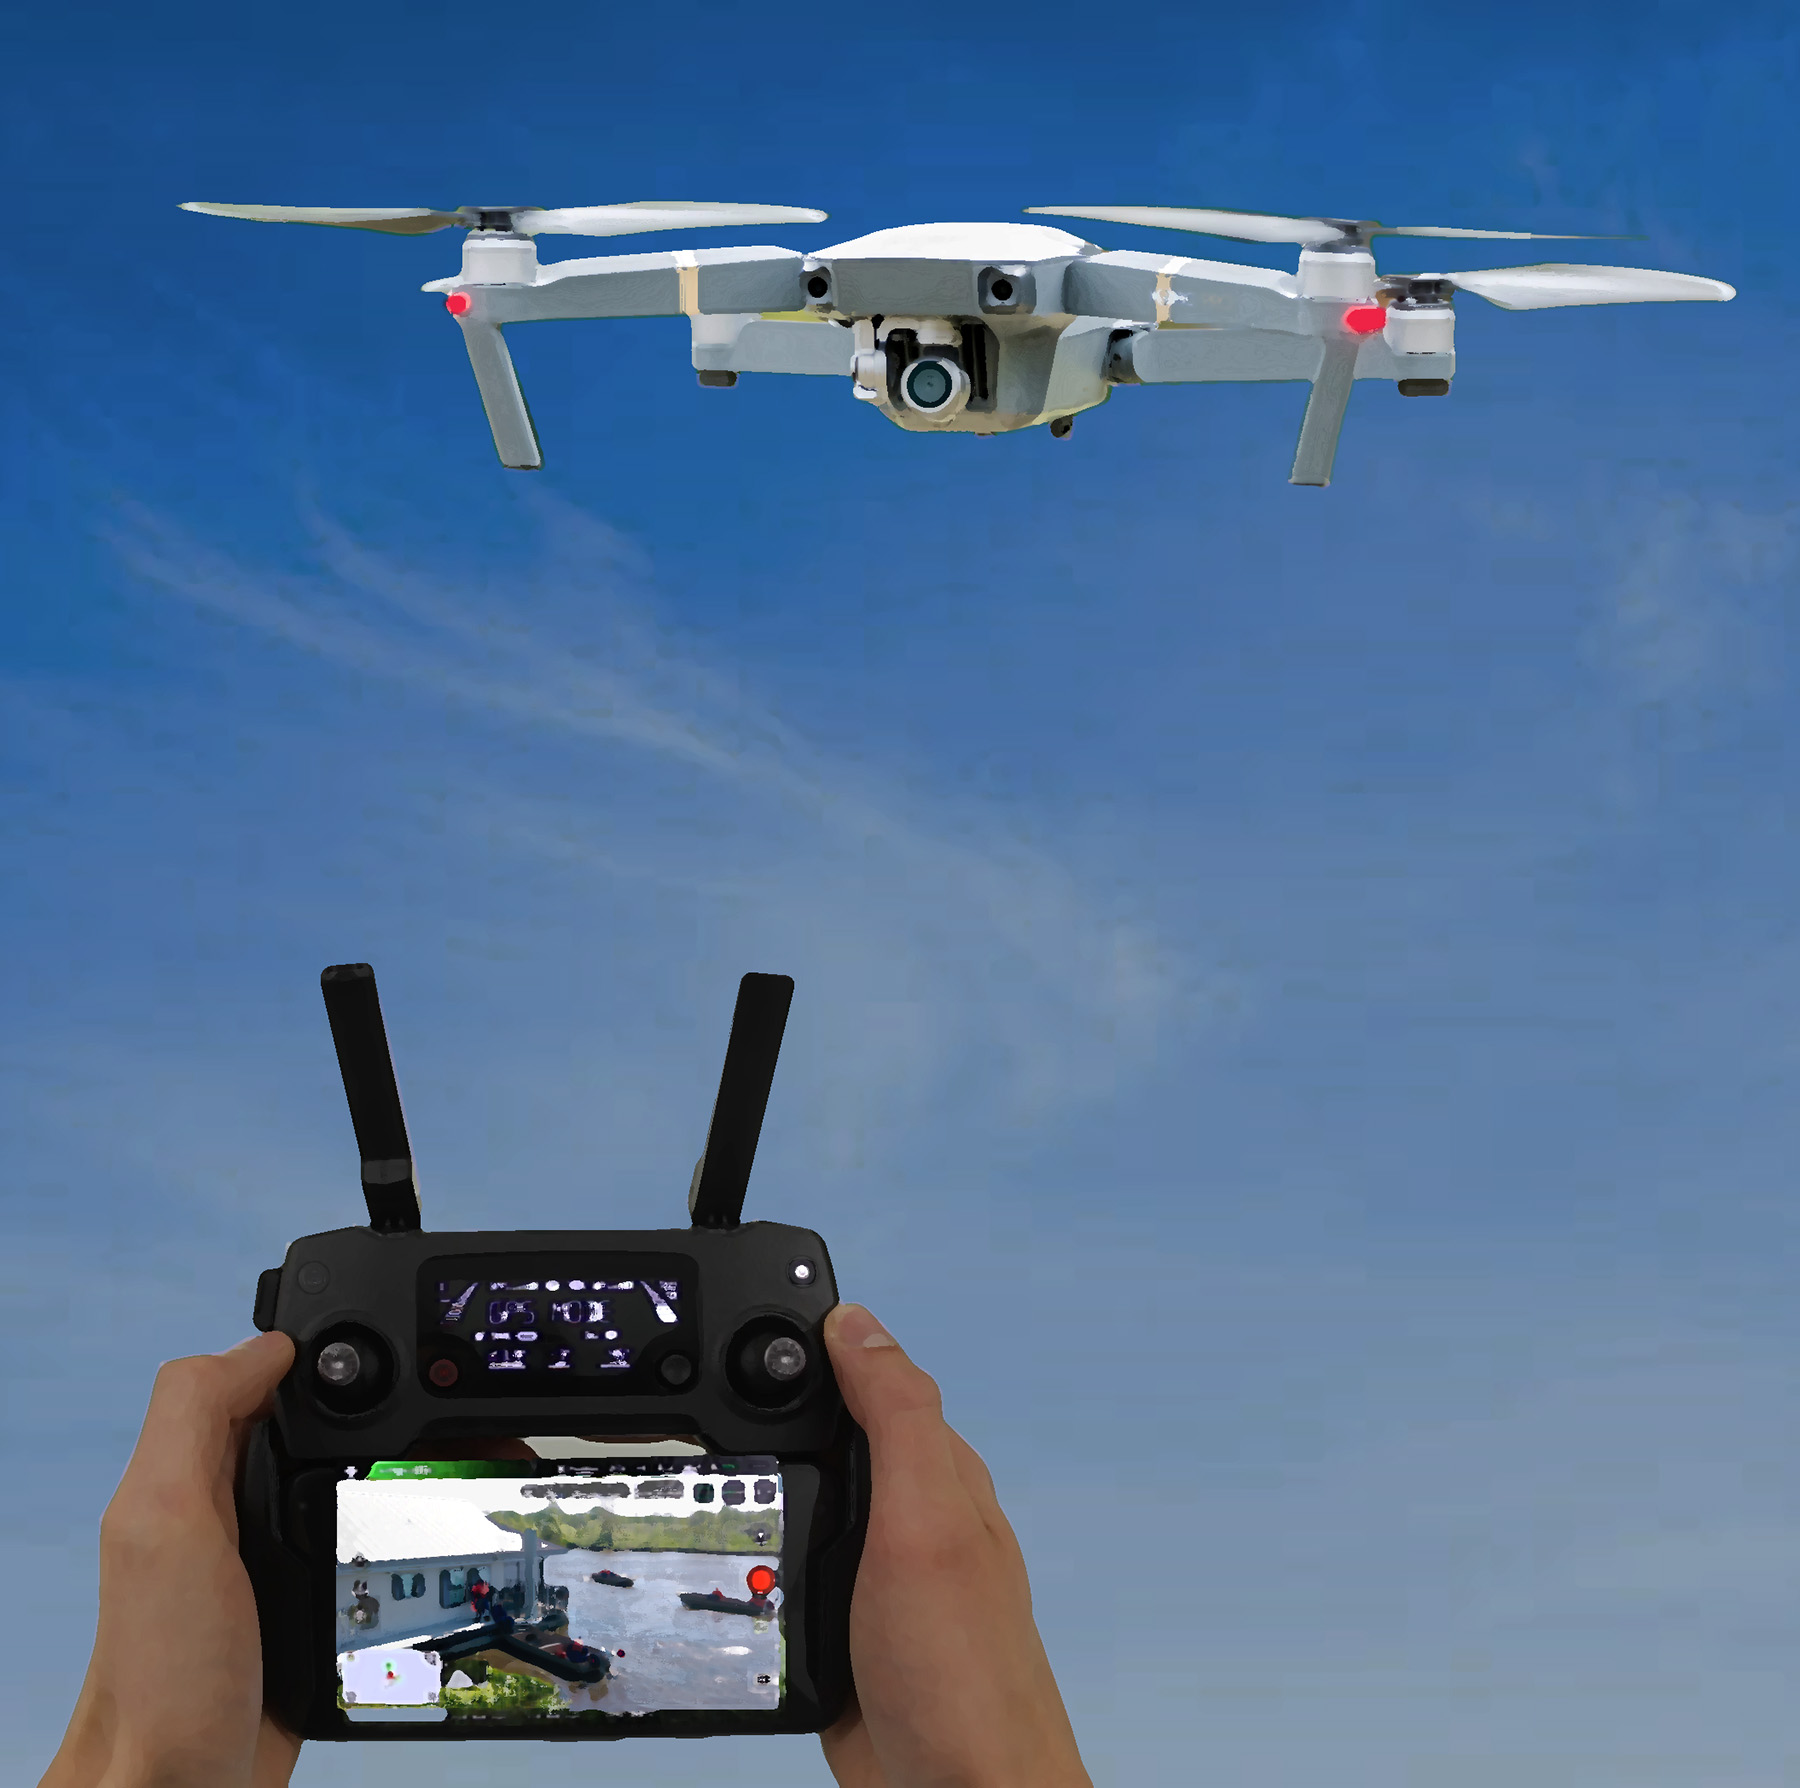 image shows an electronic device that does aerial searches at the top and at the bottom are hands holding another electronic device that controls the device at the top